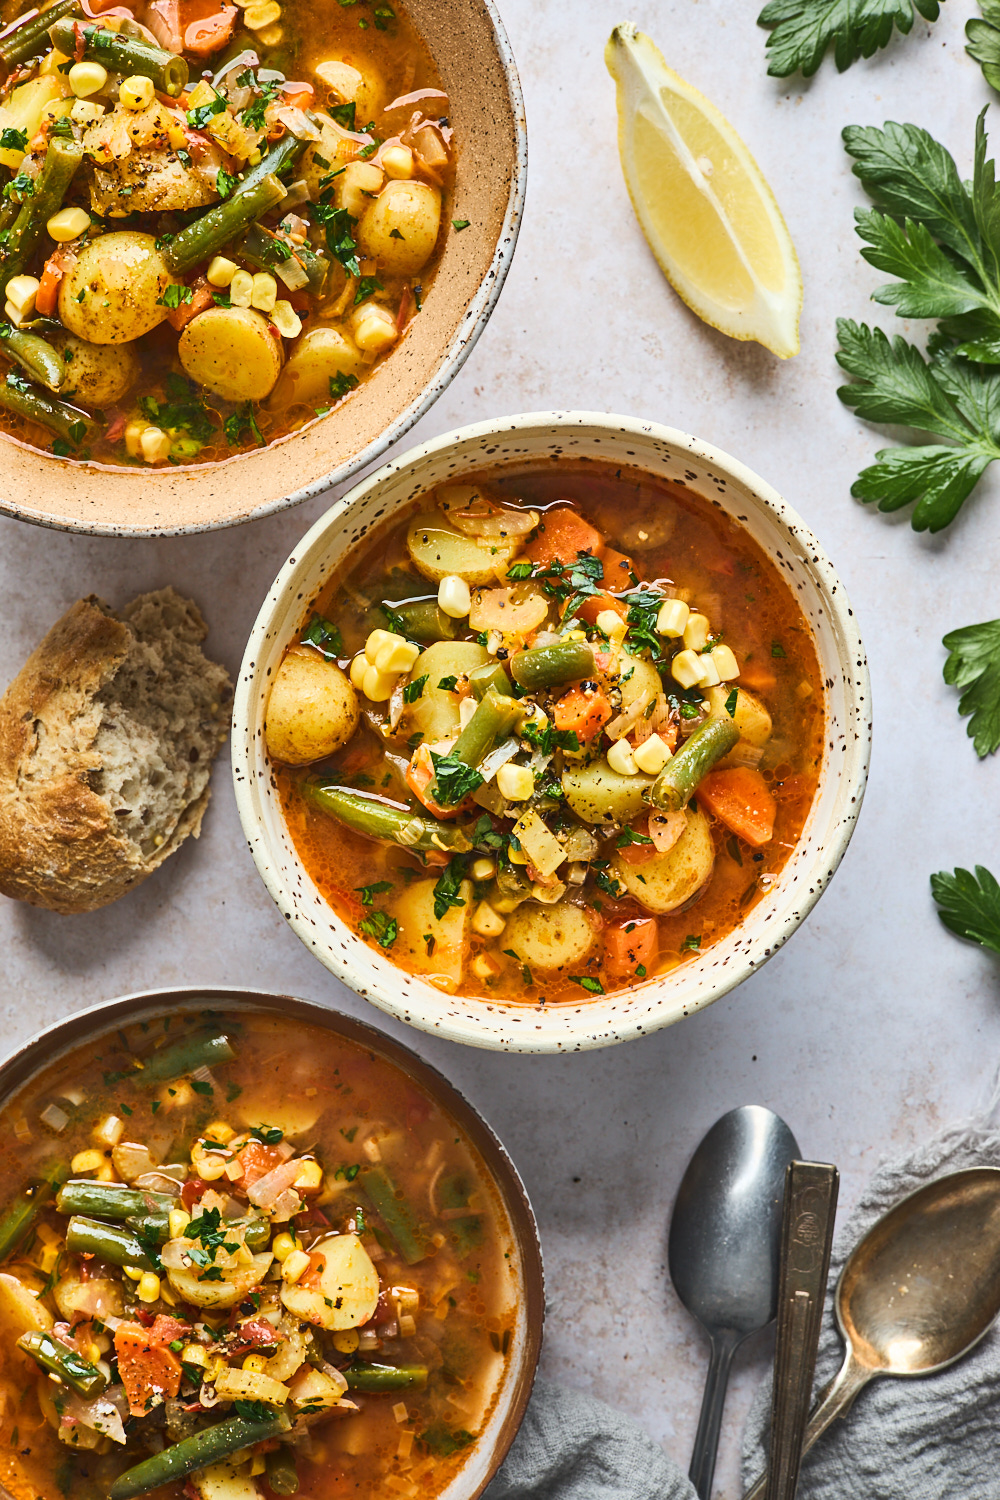 A Simple Way to Make Vegetable Soup